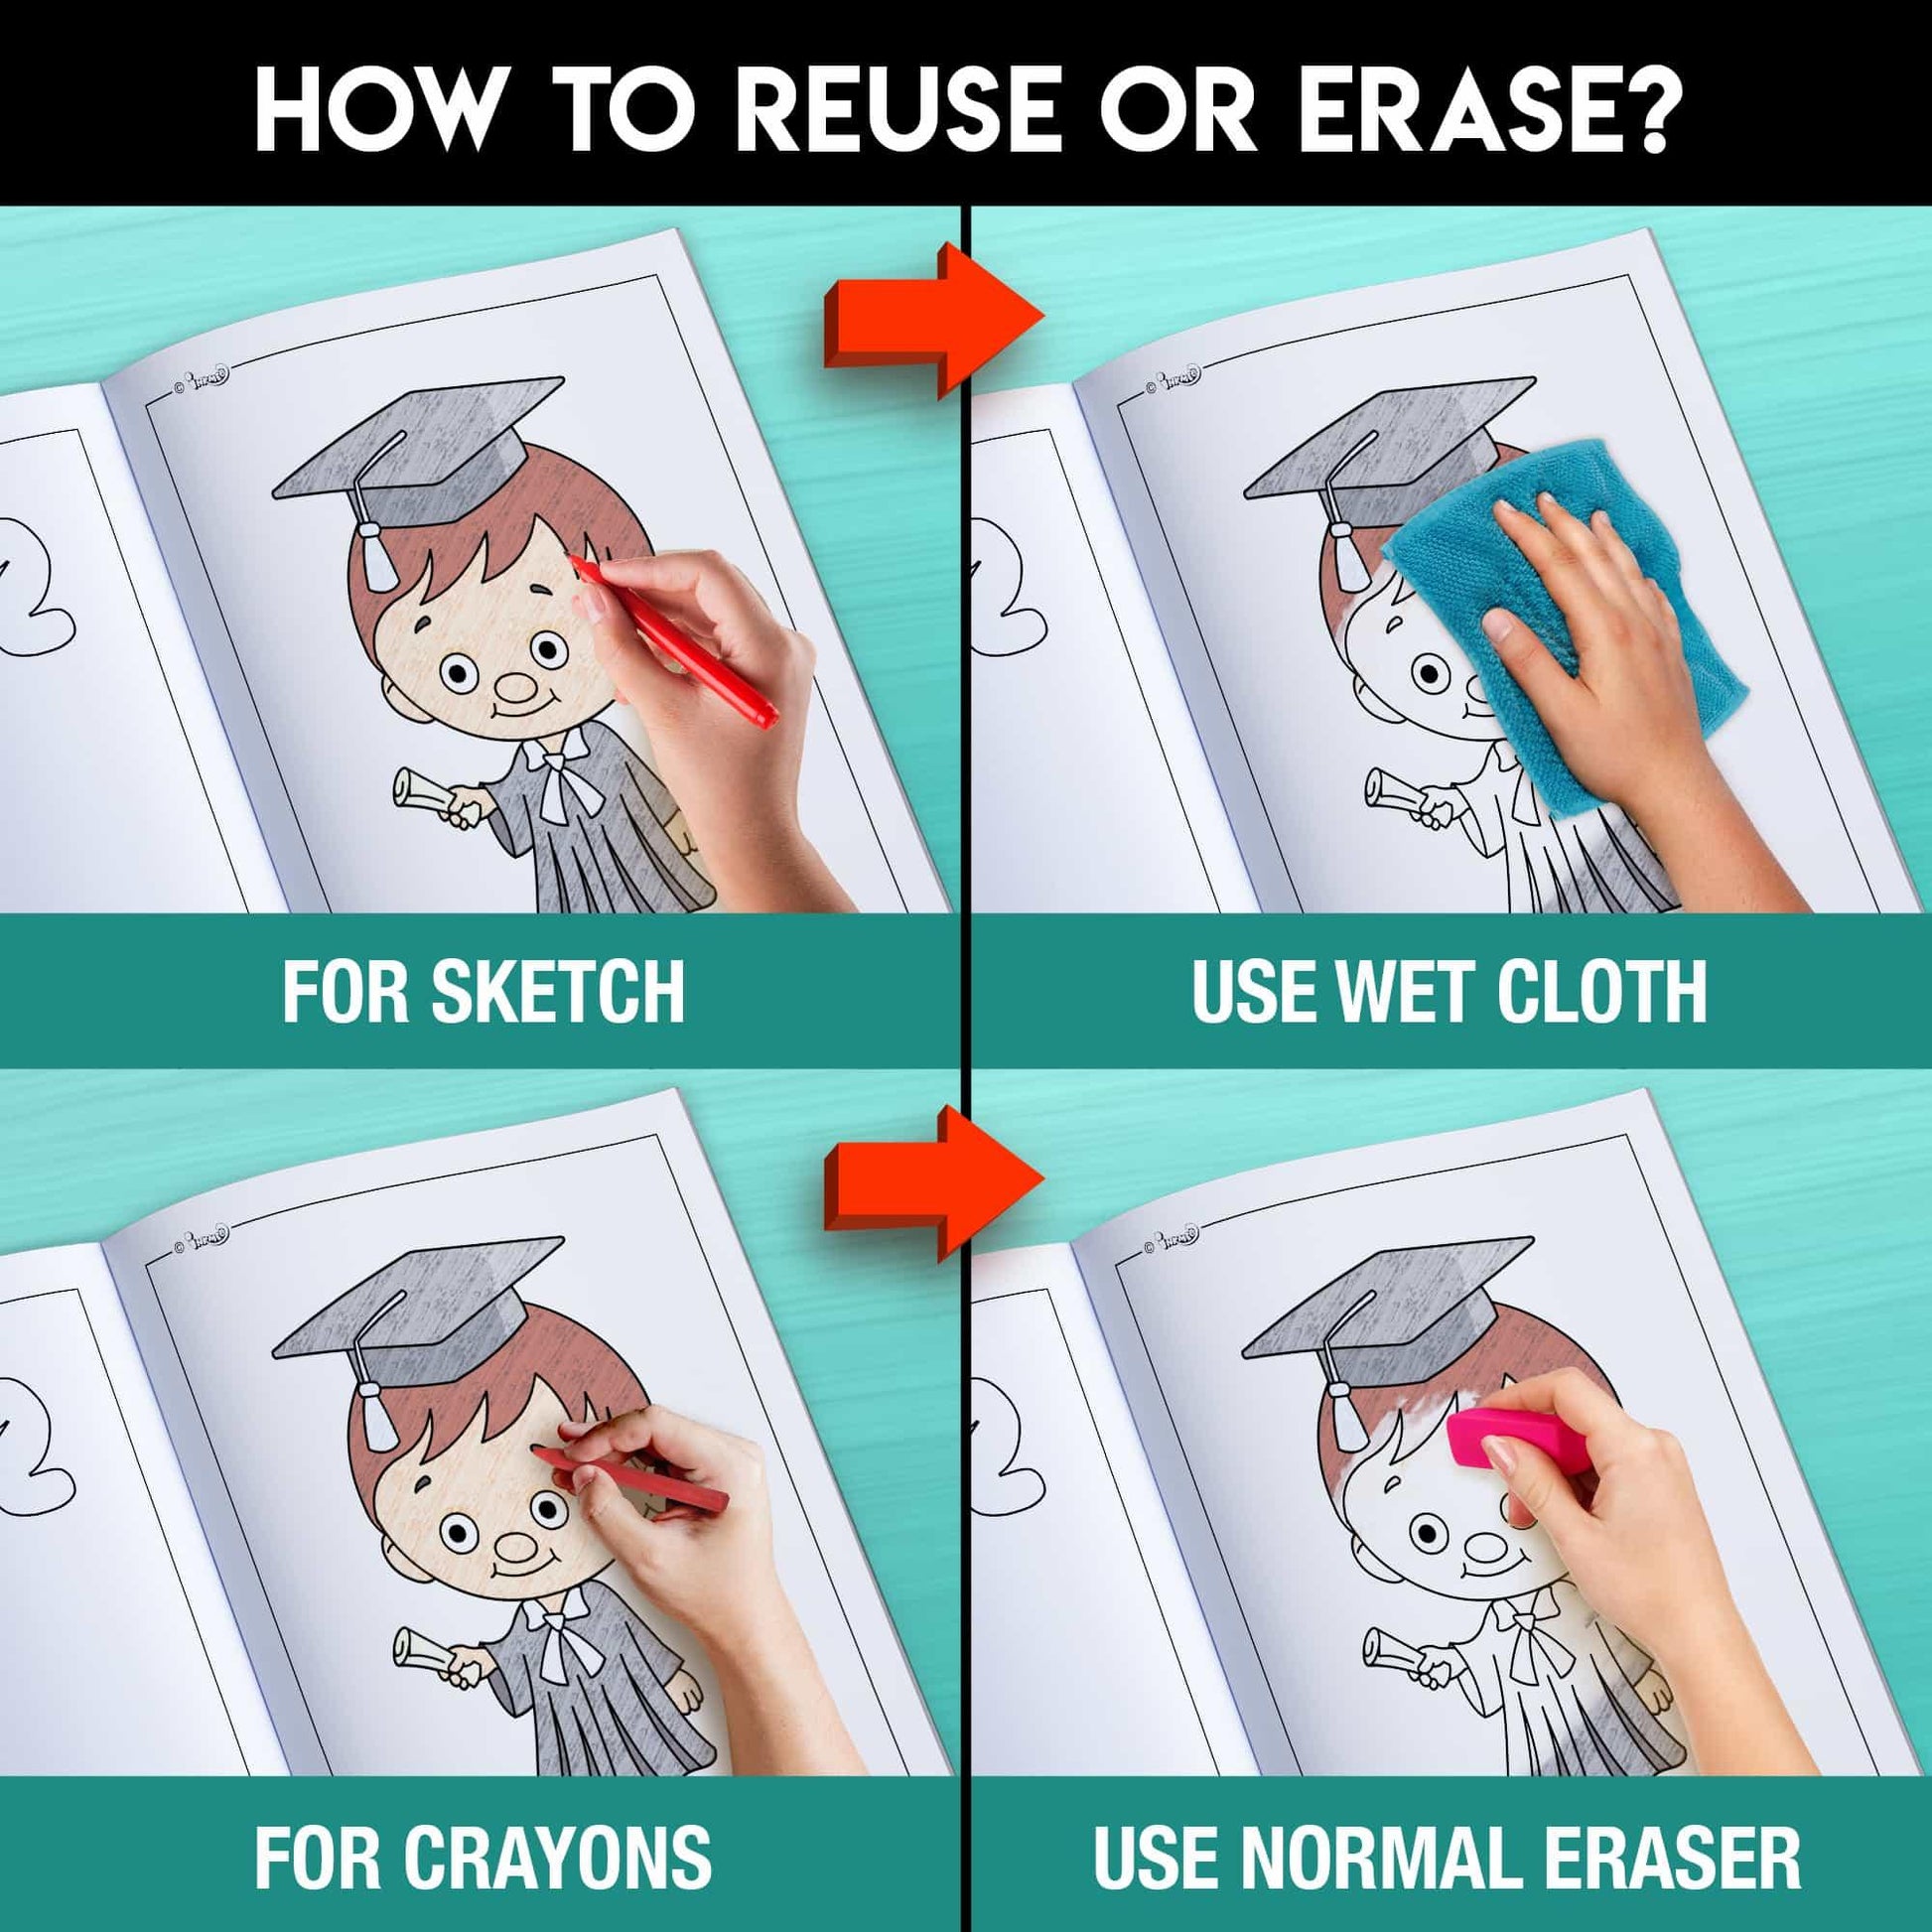 The image has a green background with four pictures demonstrating how to reuse or erase: the first picture depicts sketching on the sheet, the second shows using a wet cloth to remove sketches, the third image displays crayons colouring on the sheet, and the fourth image illustrates erasing crayons with a regular eraser.